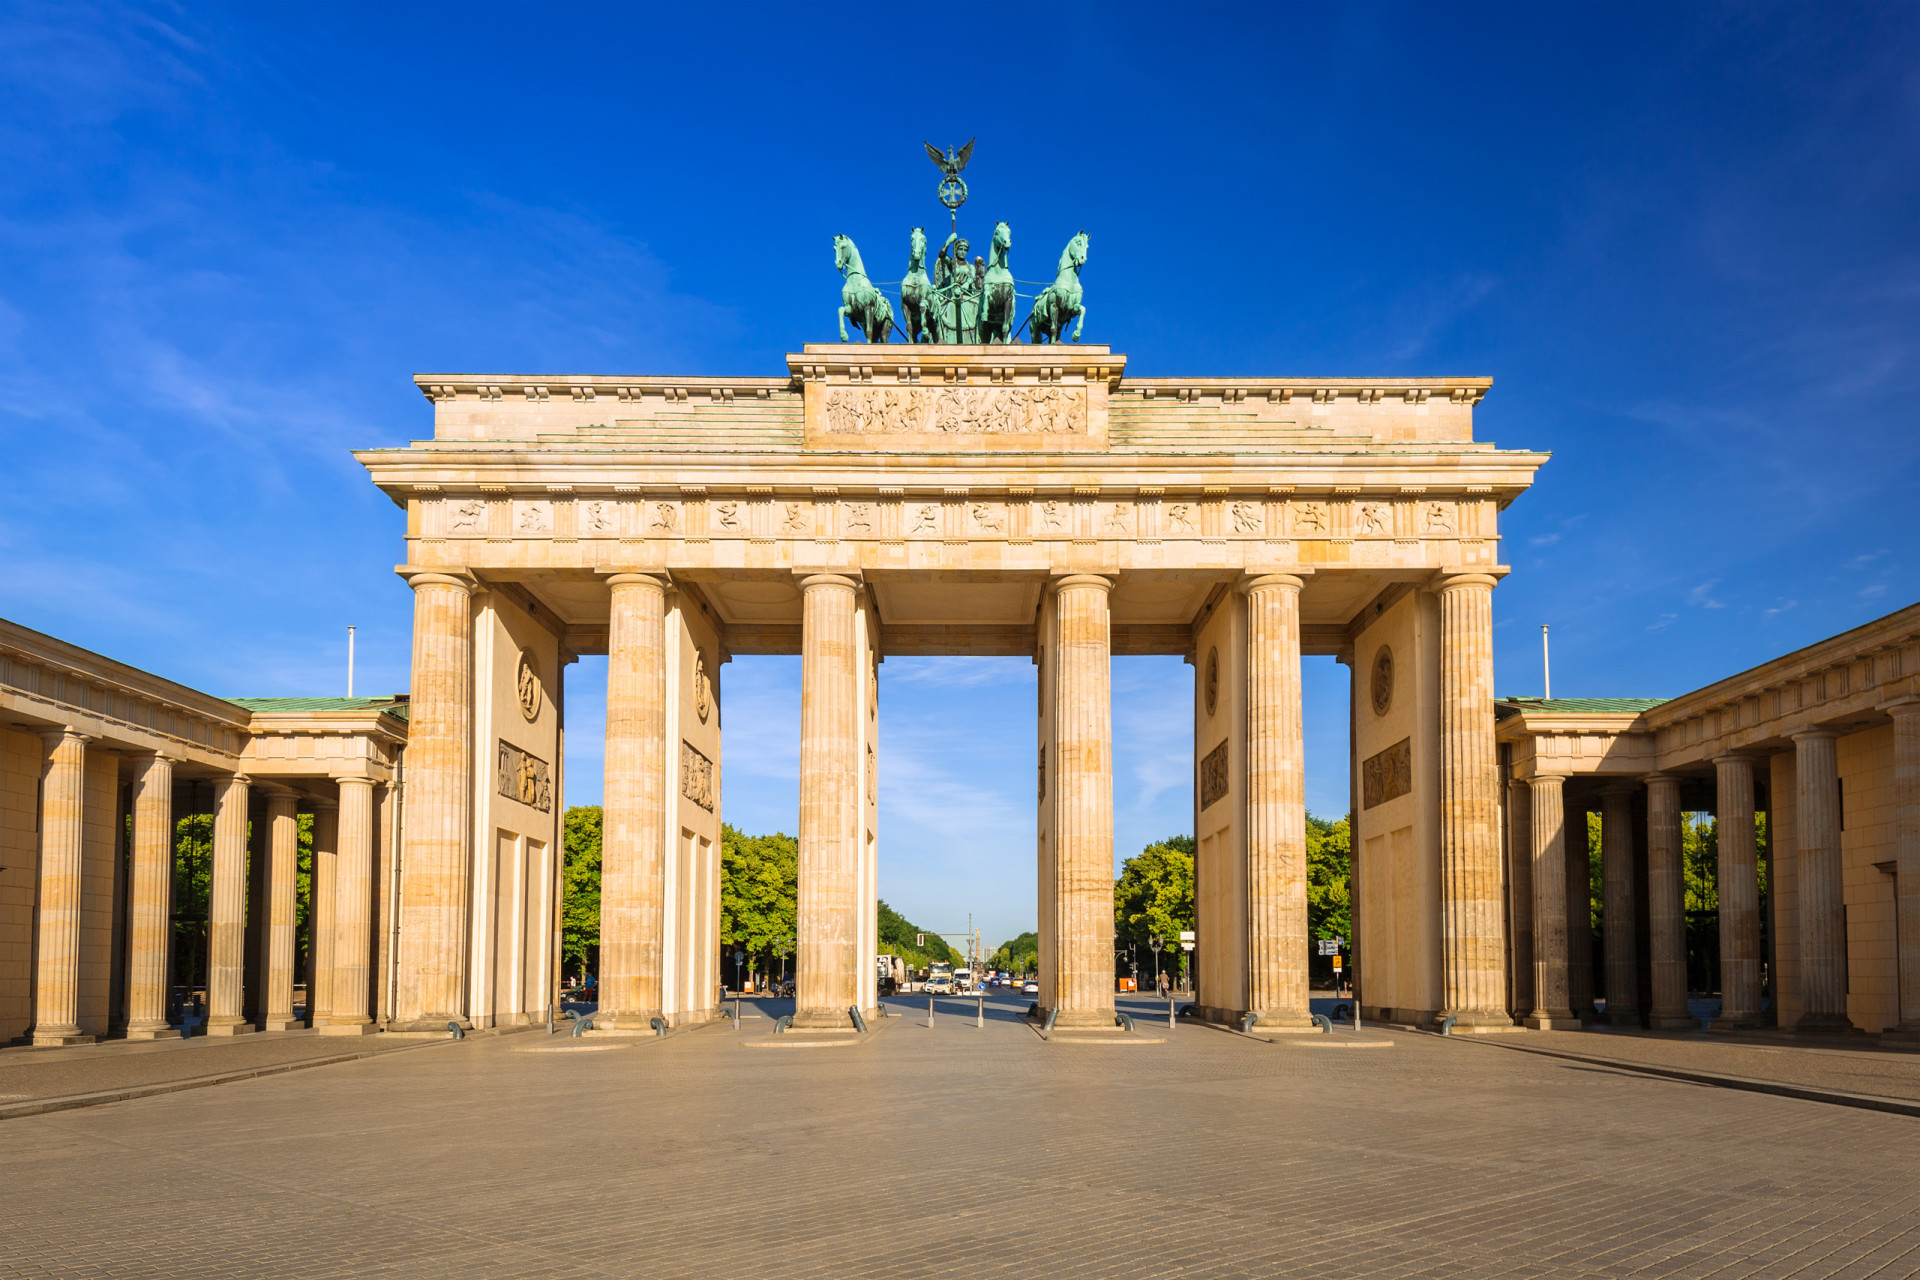 <p><span>Berlin's Brandenburg Gate is considered the worst pickpocketing spot in Germany.</span></p><p><a href="https://www.msn.com/en-us/community/channel/vid-7xx8mnucu55yw63we9va2gwr7uihbxwc68fxqp25x6tg4ftibpra?cvid=94631541bc0f4f89bfd59158d696ad7e">Follow us and access great exclusive content every day</a></p>